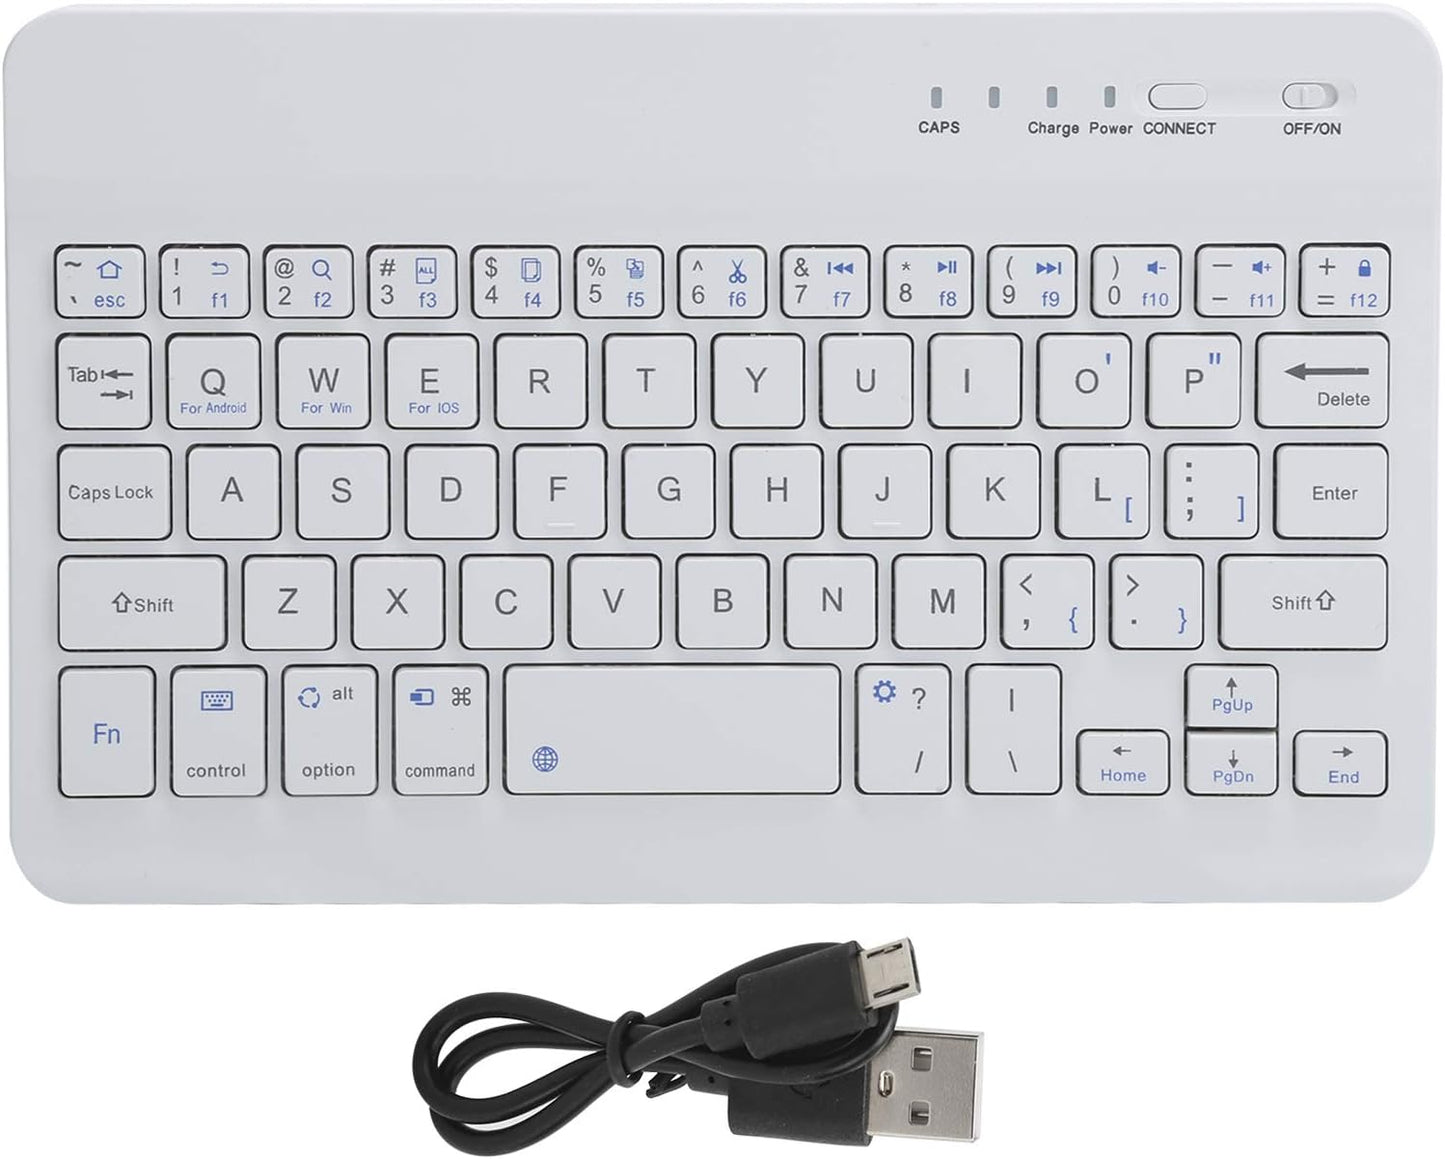  Wireless Keyboard ,  Compact Portable  Rechargeable   Ultra Slim   - NWS79 2053-5